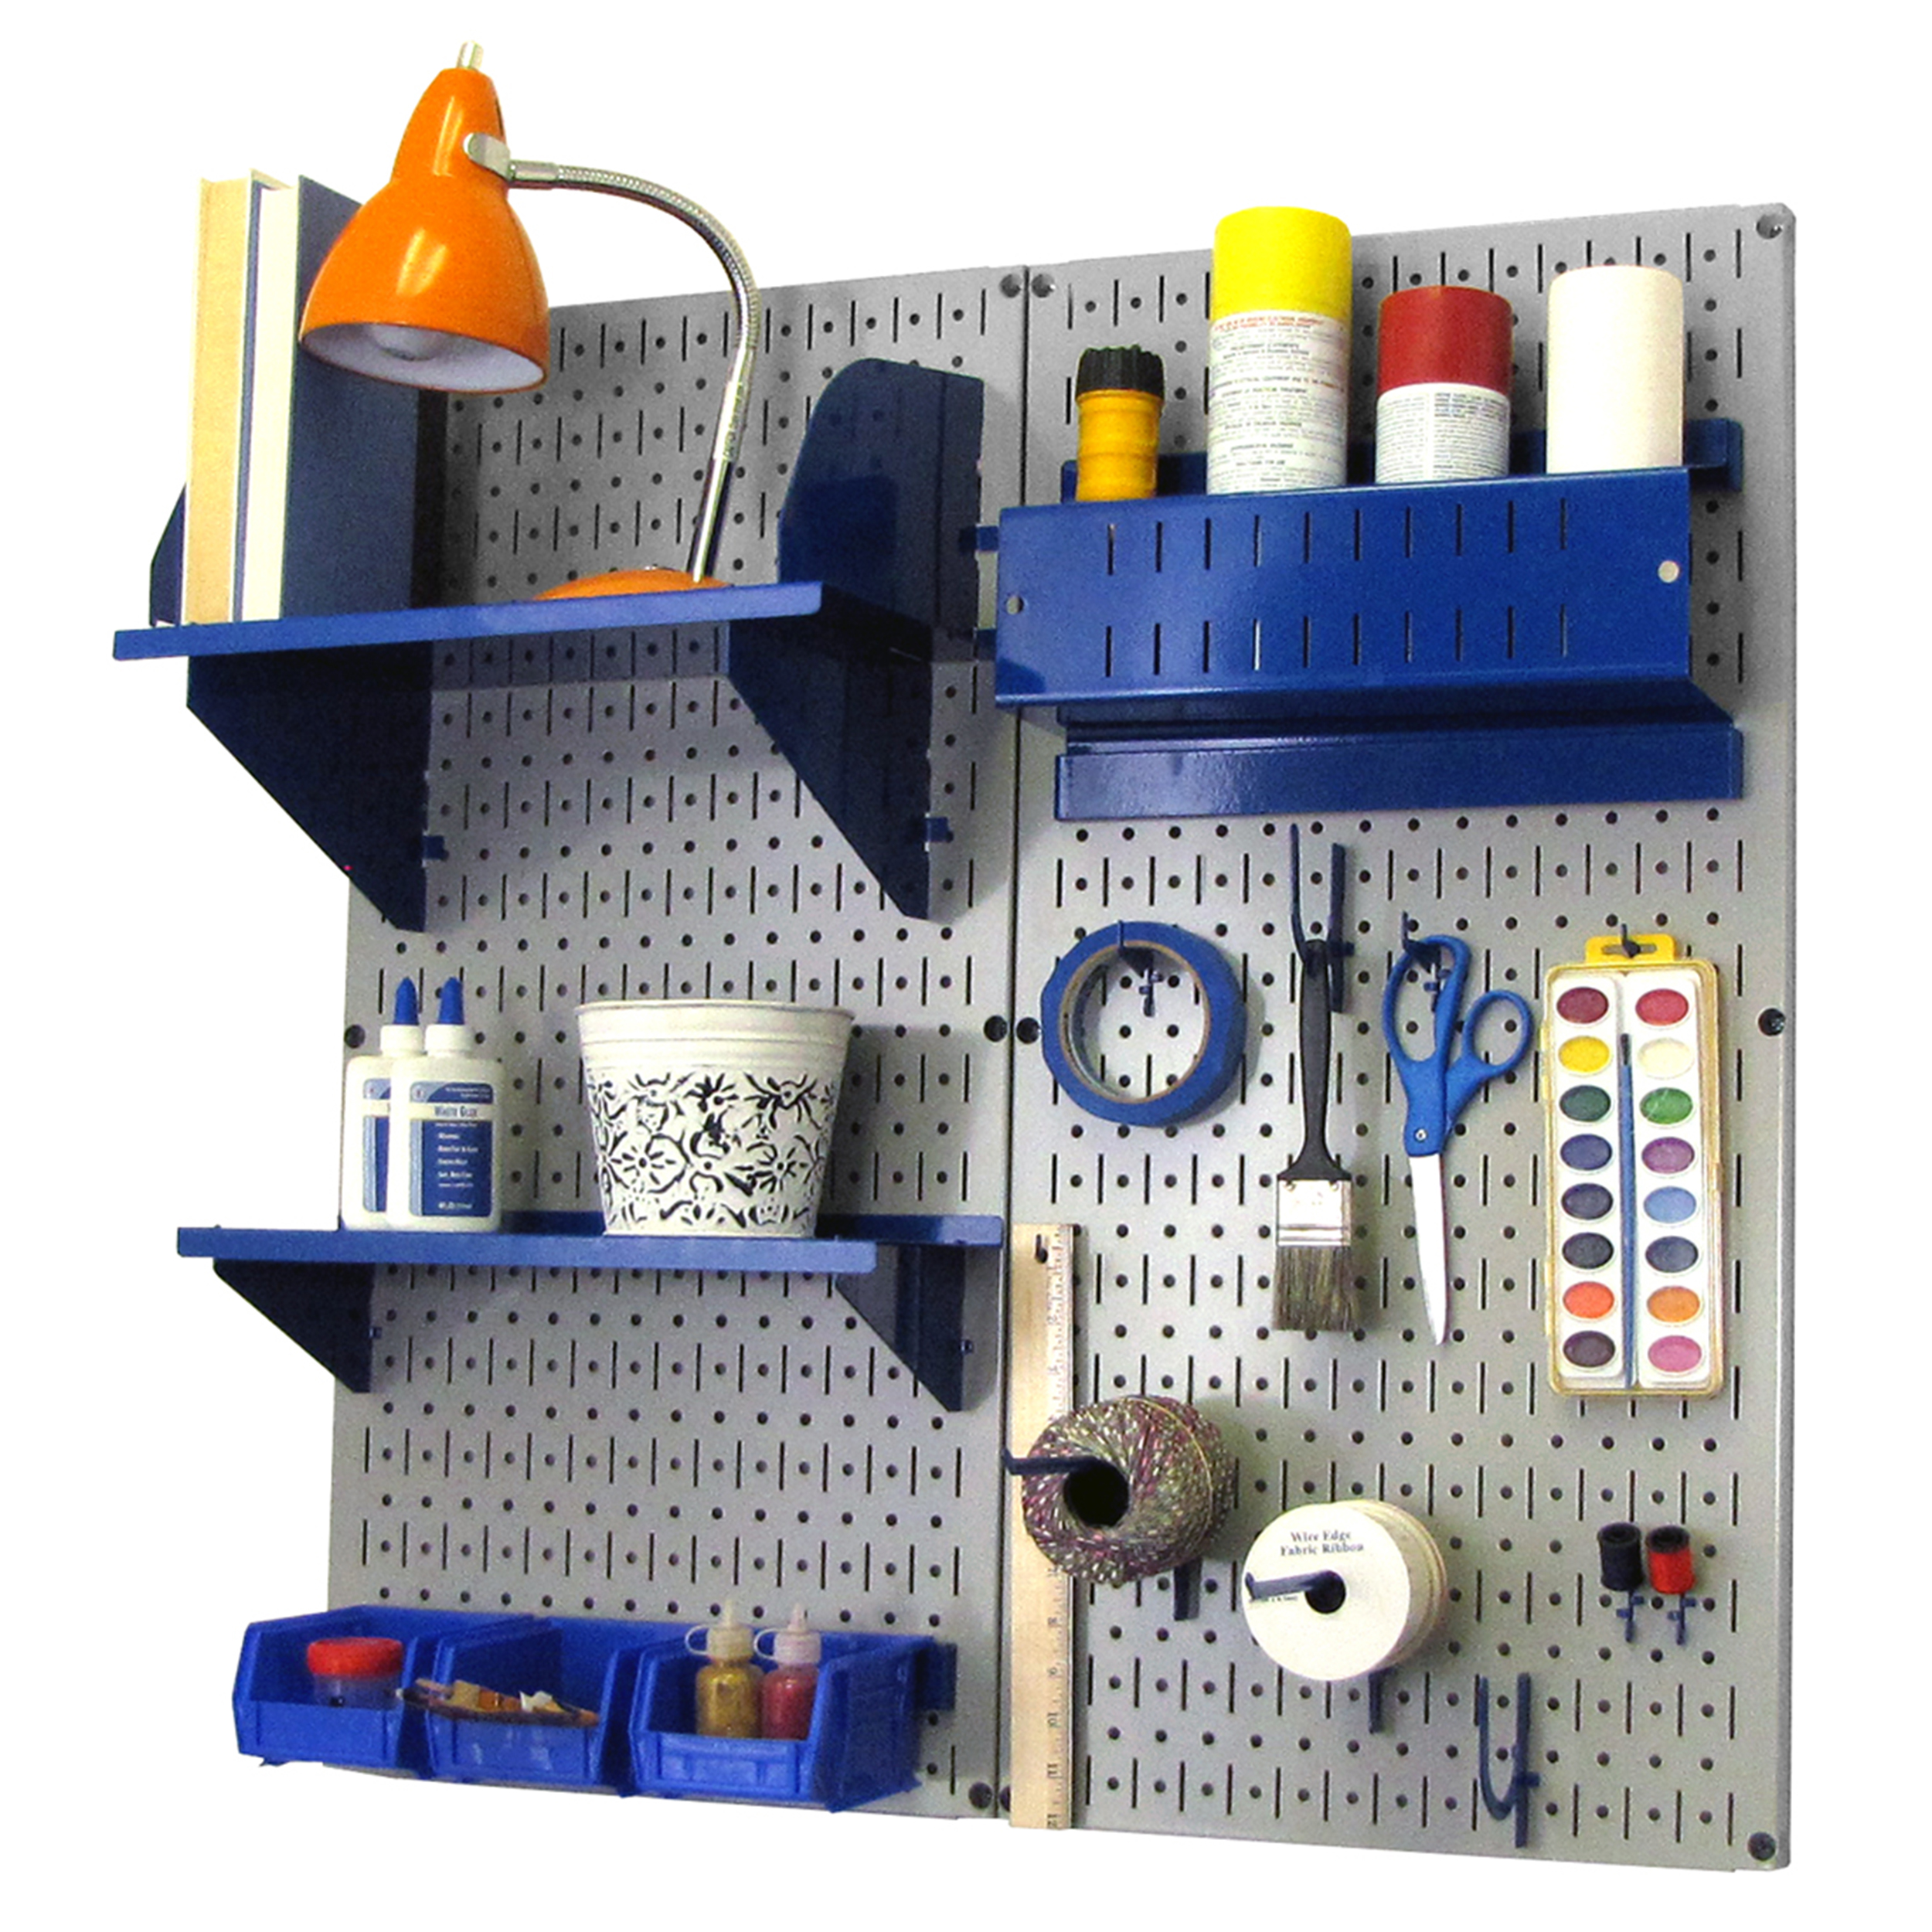 Pegboard Hobby Craft Pegboard Organizer Storage Kit With Gray Pegboard And Blue Accessories